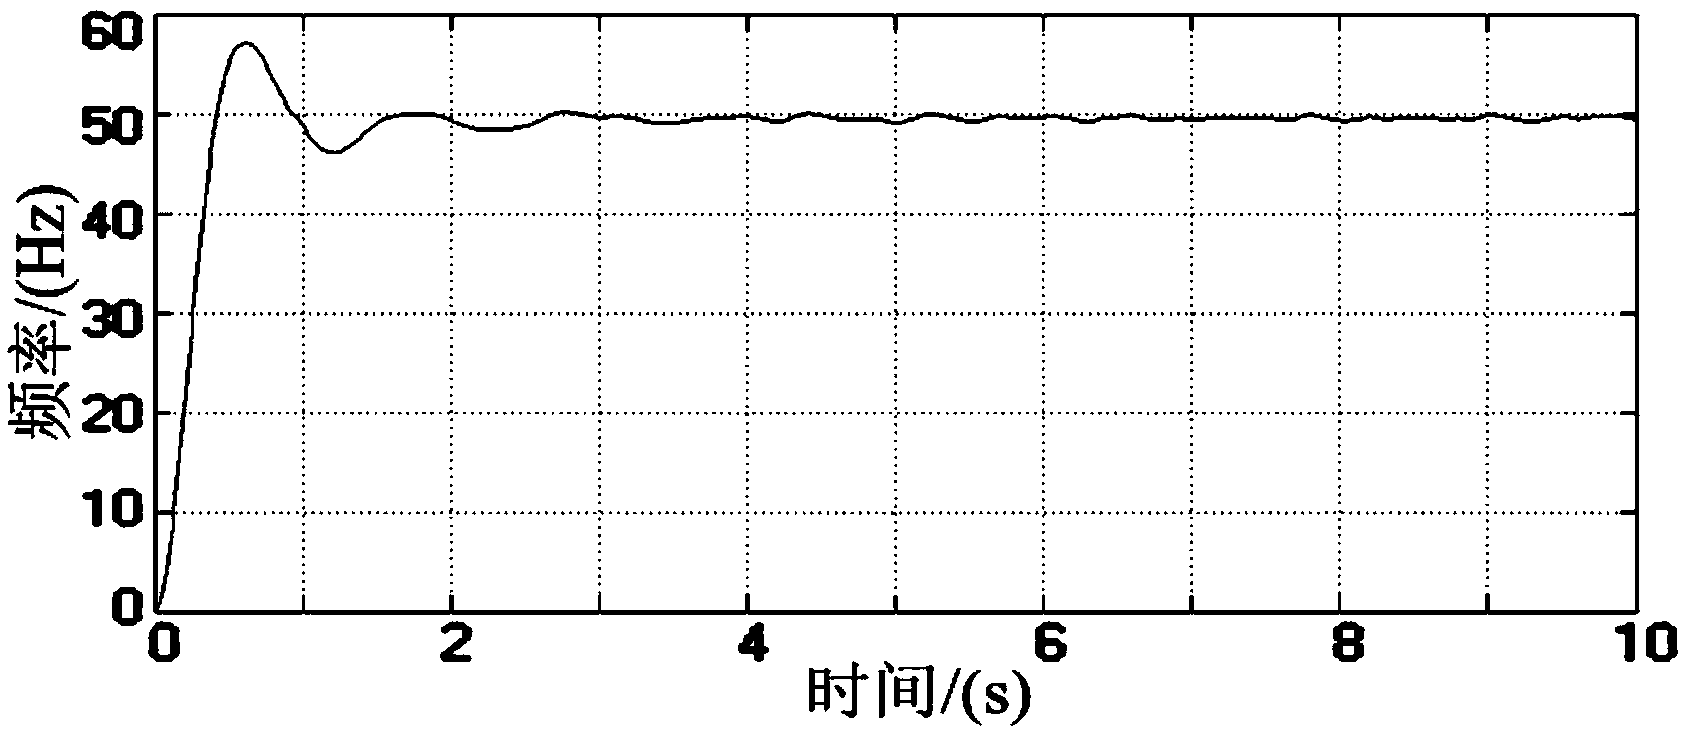 Automatic quasi-synchronization grid-connected control method for automatic-control frequency conversion soft start of medium-high pressure synchronous motors